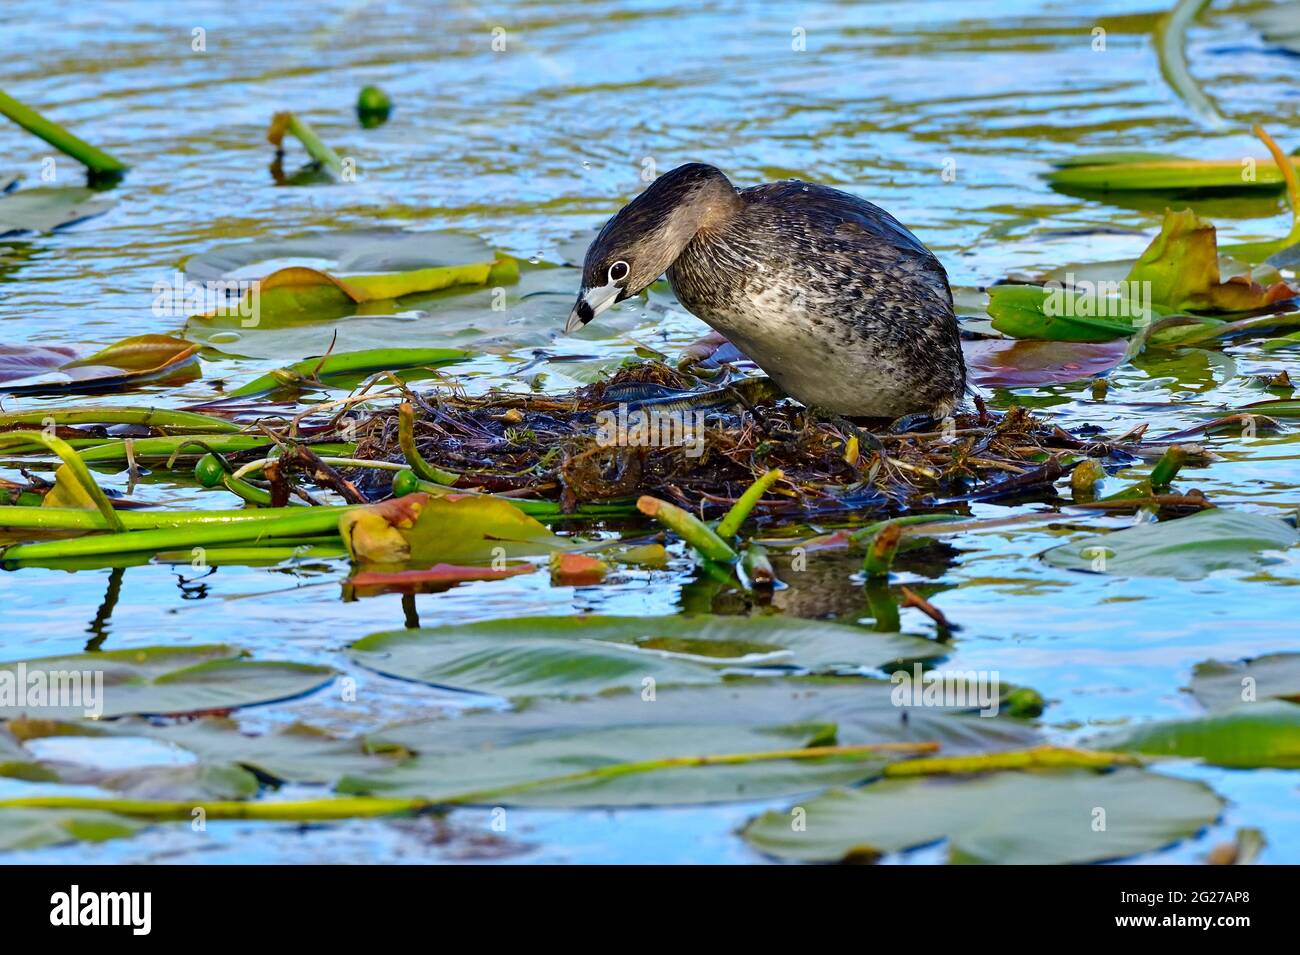 A female Pied-billed Grebe 'Podilymbus podiceps'; building  a floating nest made of lilly pads at the marshy area in a rural Alberta Lake Stock Photo